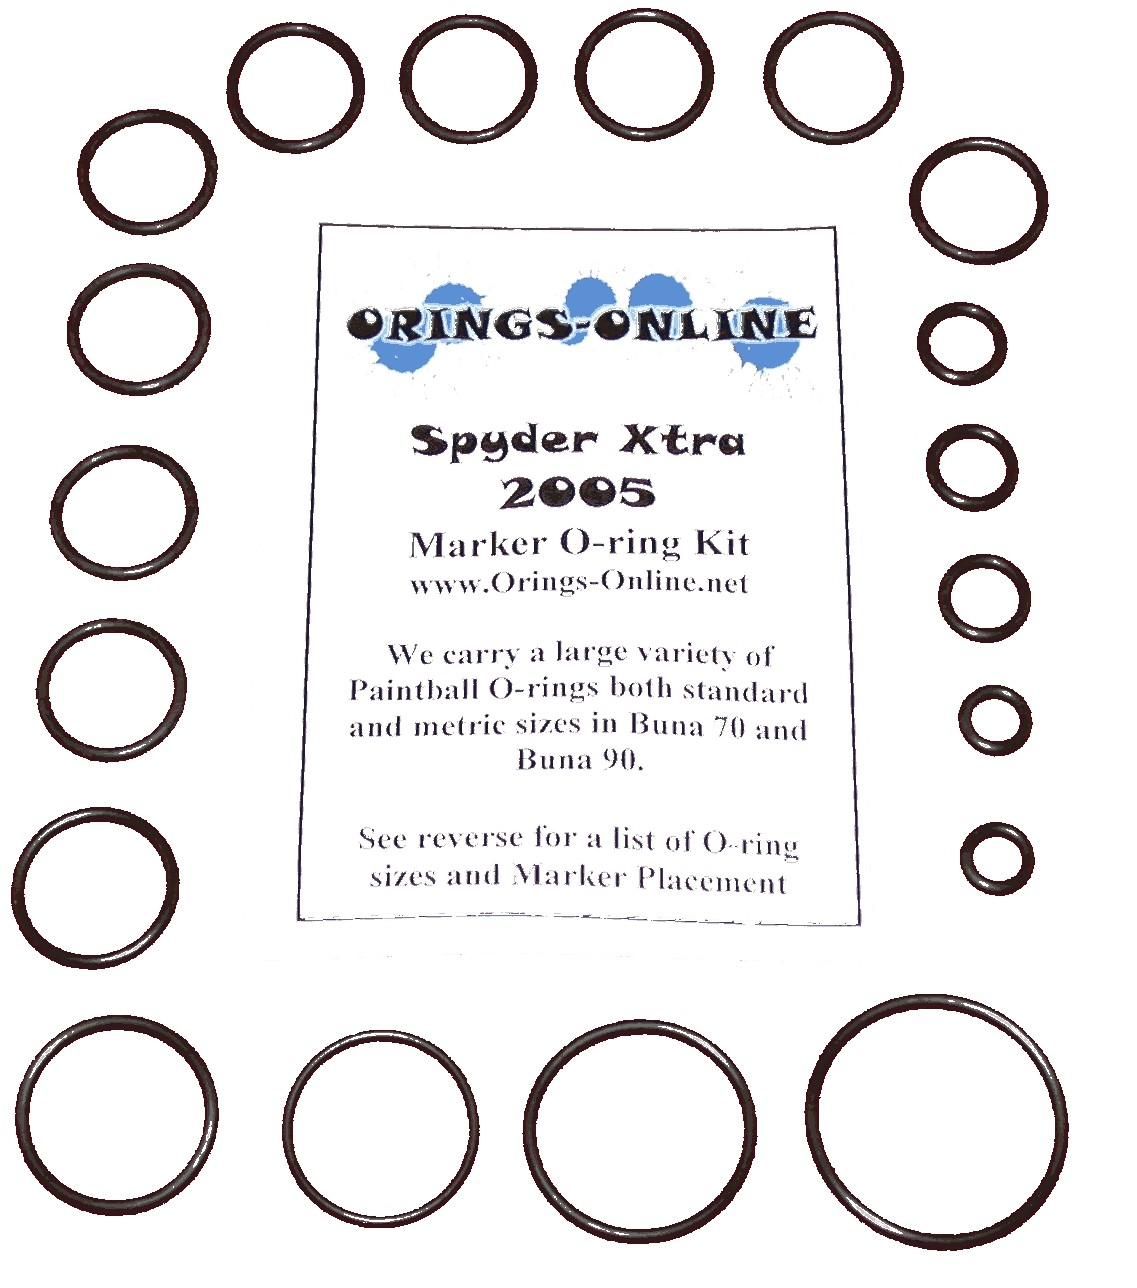 SQUARE & ROUND STANDARD RUBBER O-RINGS 3/32" PAINTBALL 